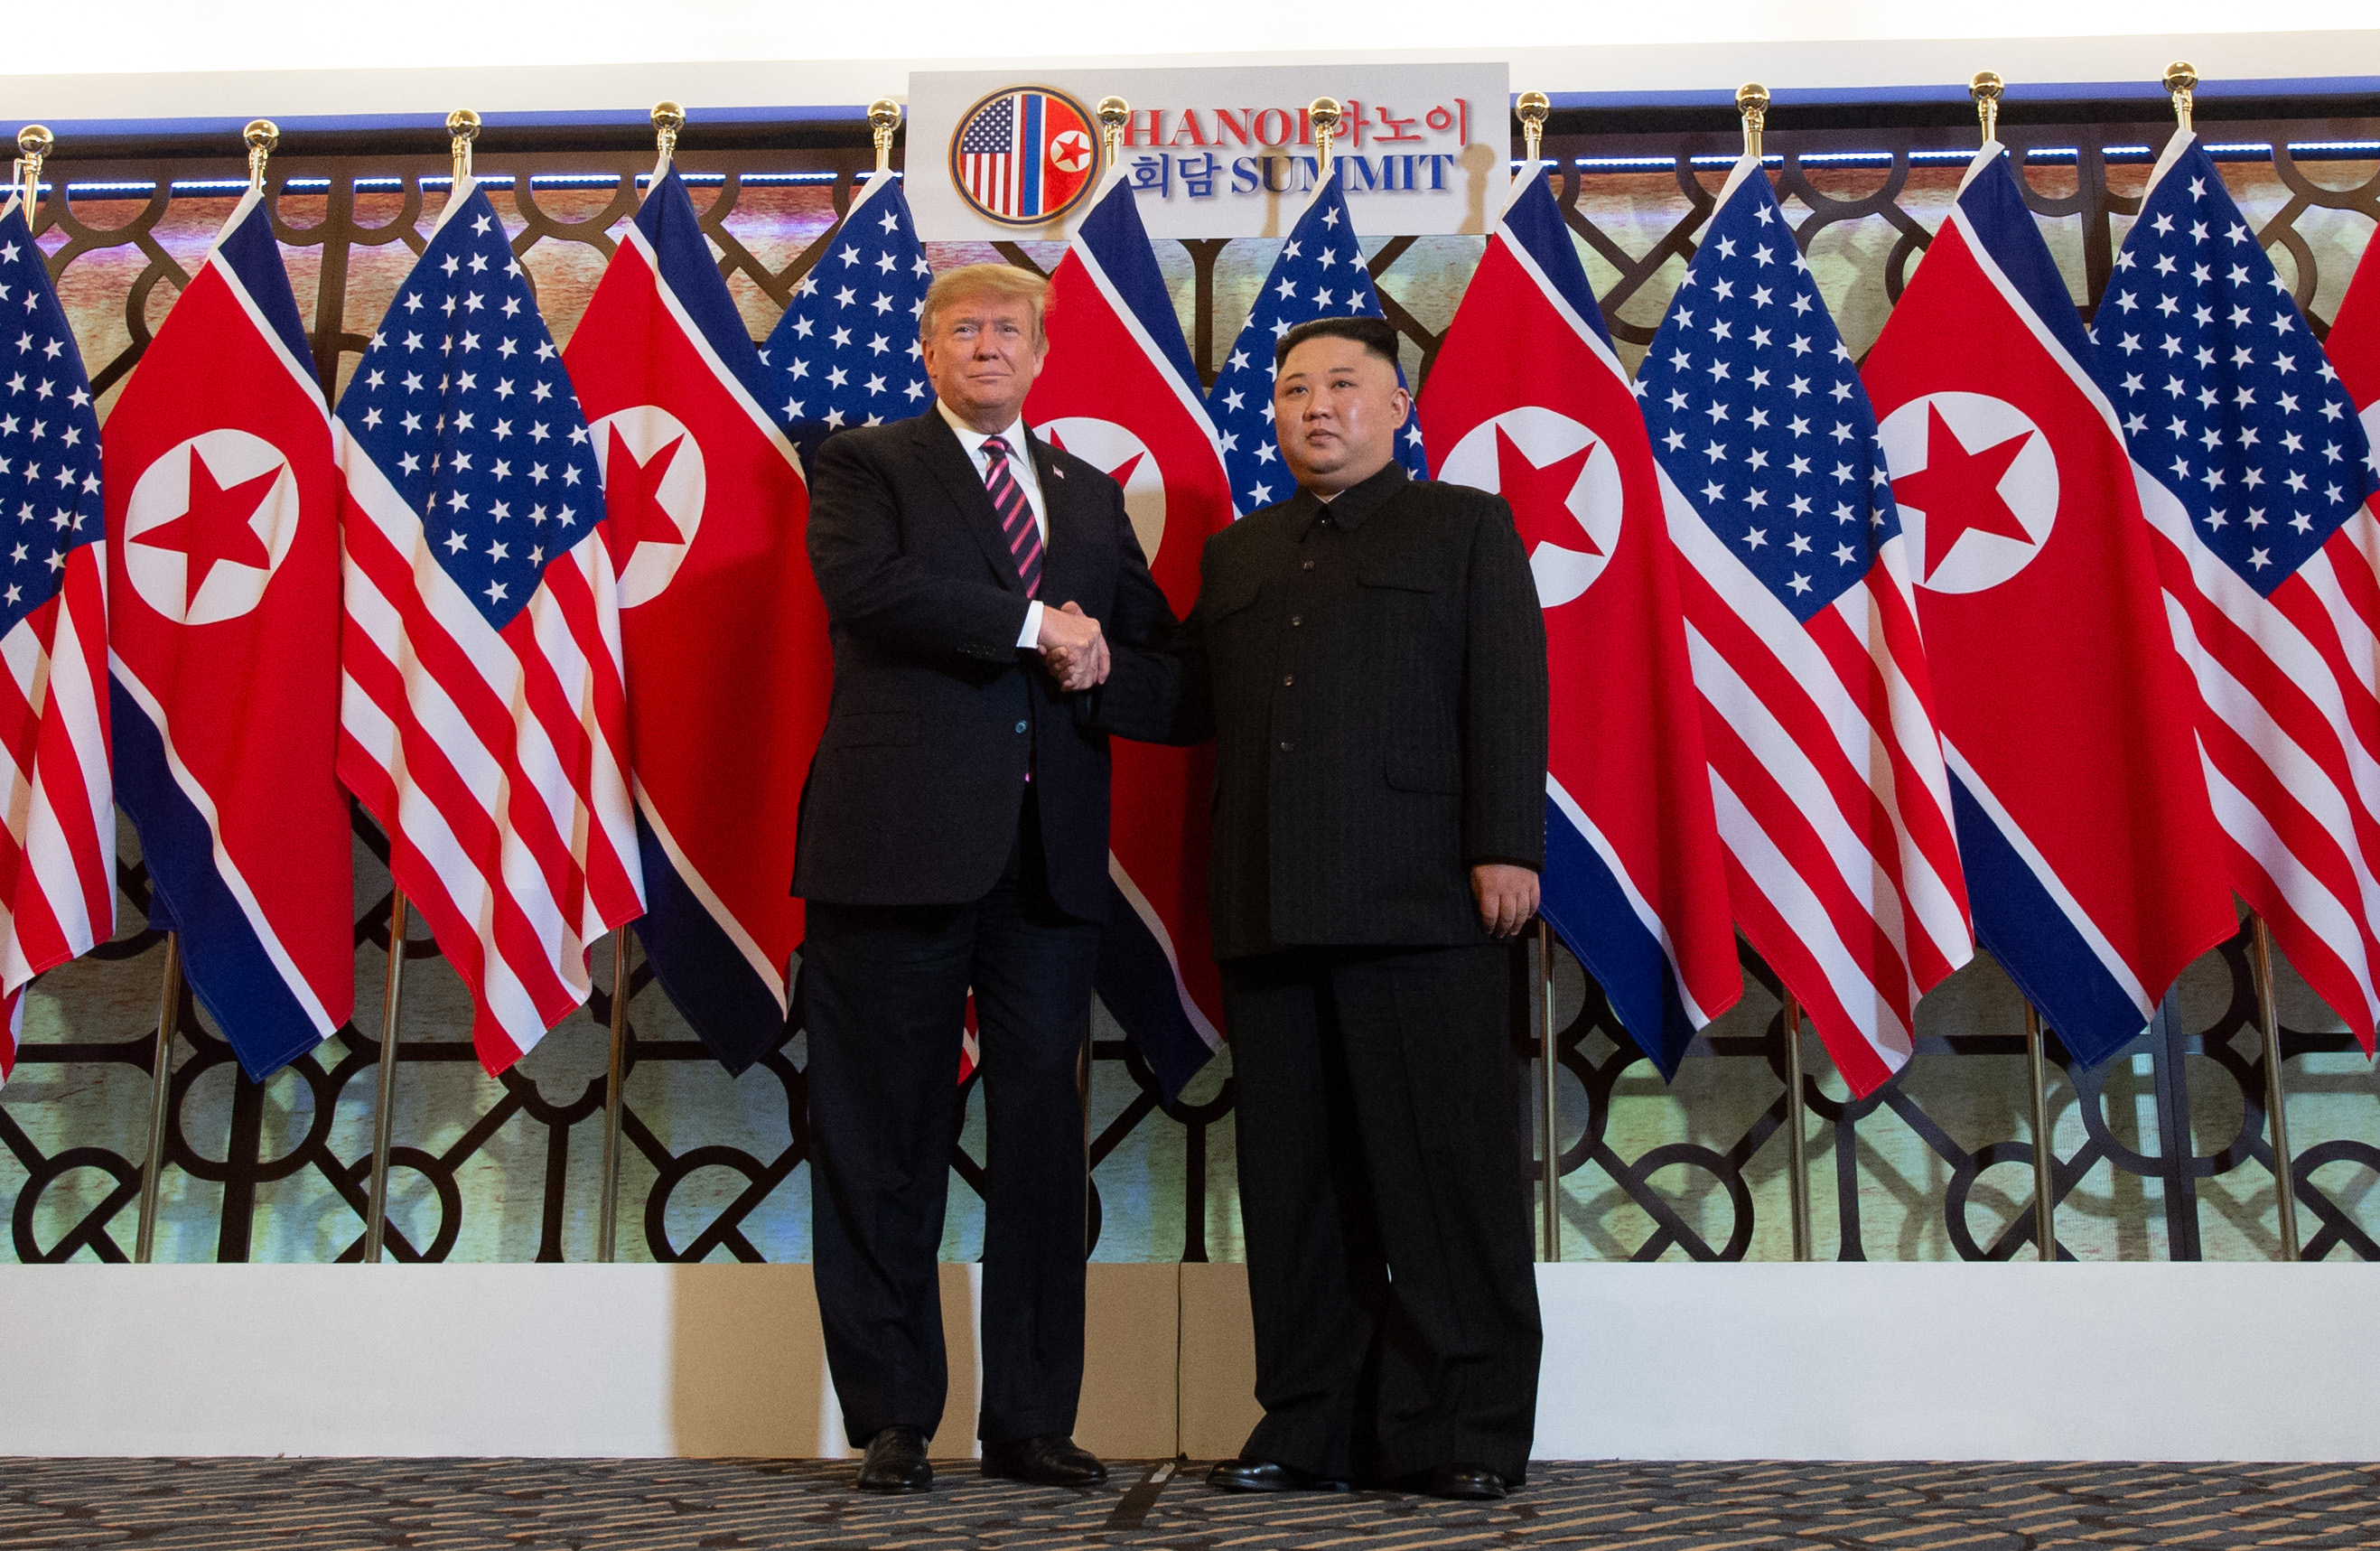 President Donald Trump shakes hands with North Korea's leader Kim Jong Un before a meeting at the Sofitel Legend Metropole hotel in Hanoi on Feb. 27, 2019. (Saul Loeb—AFP/Getty Images)